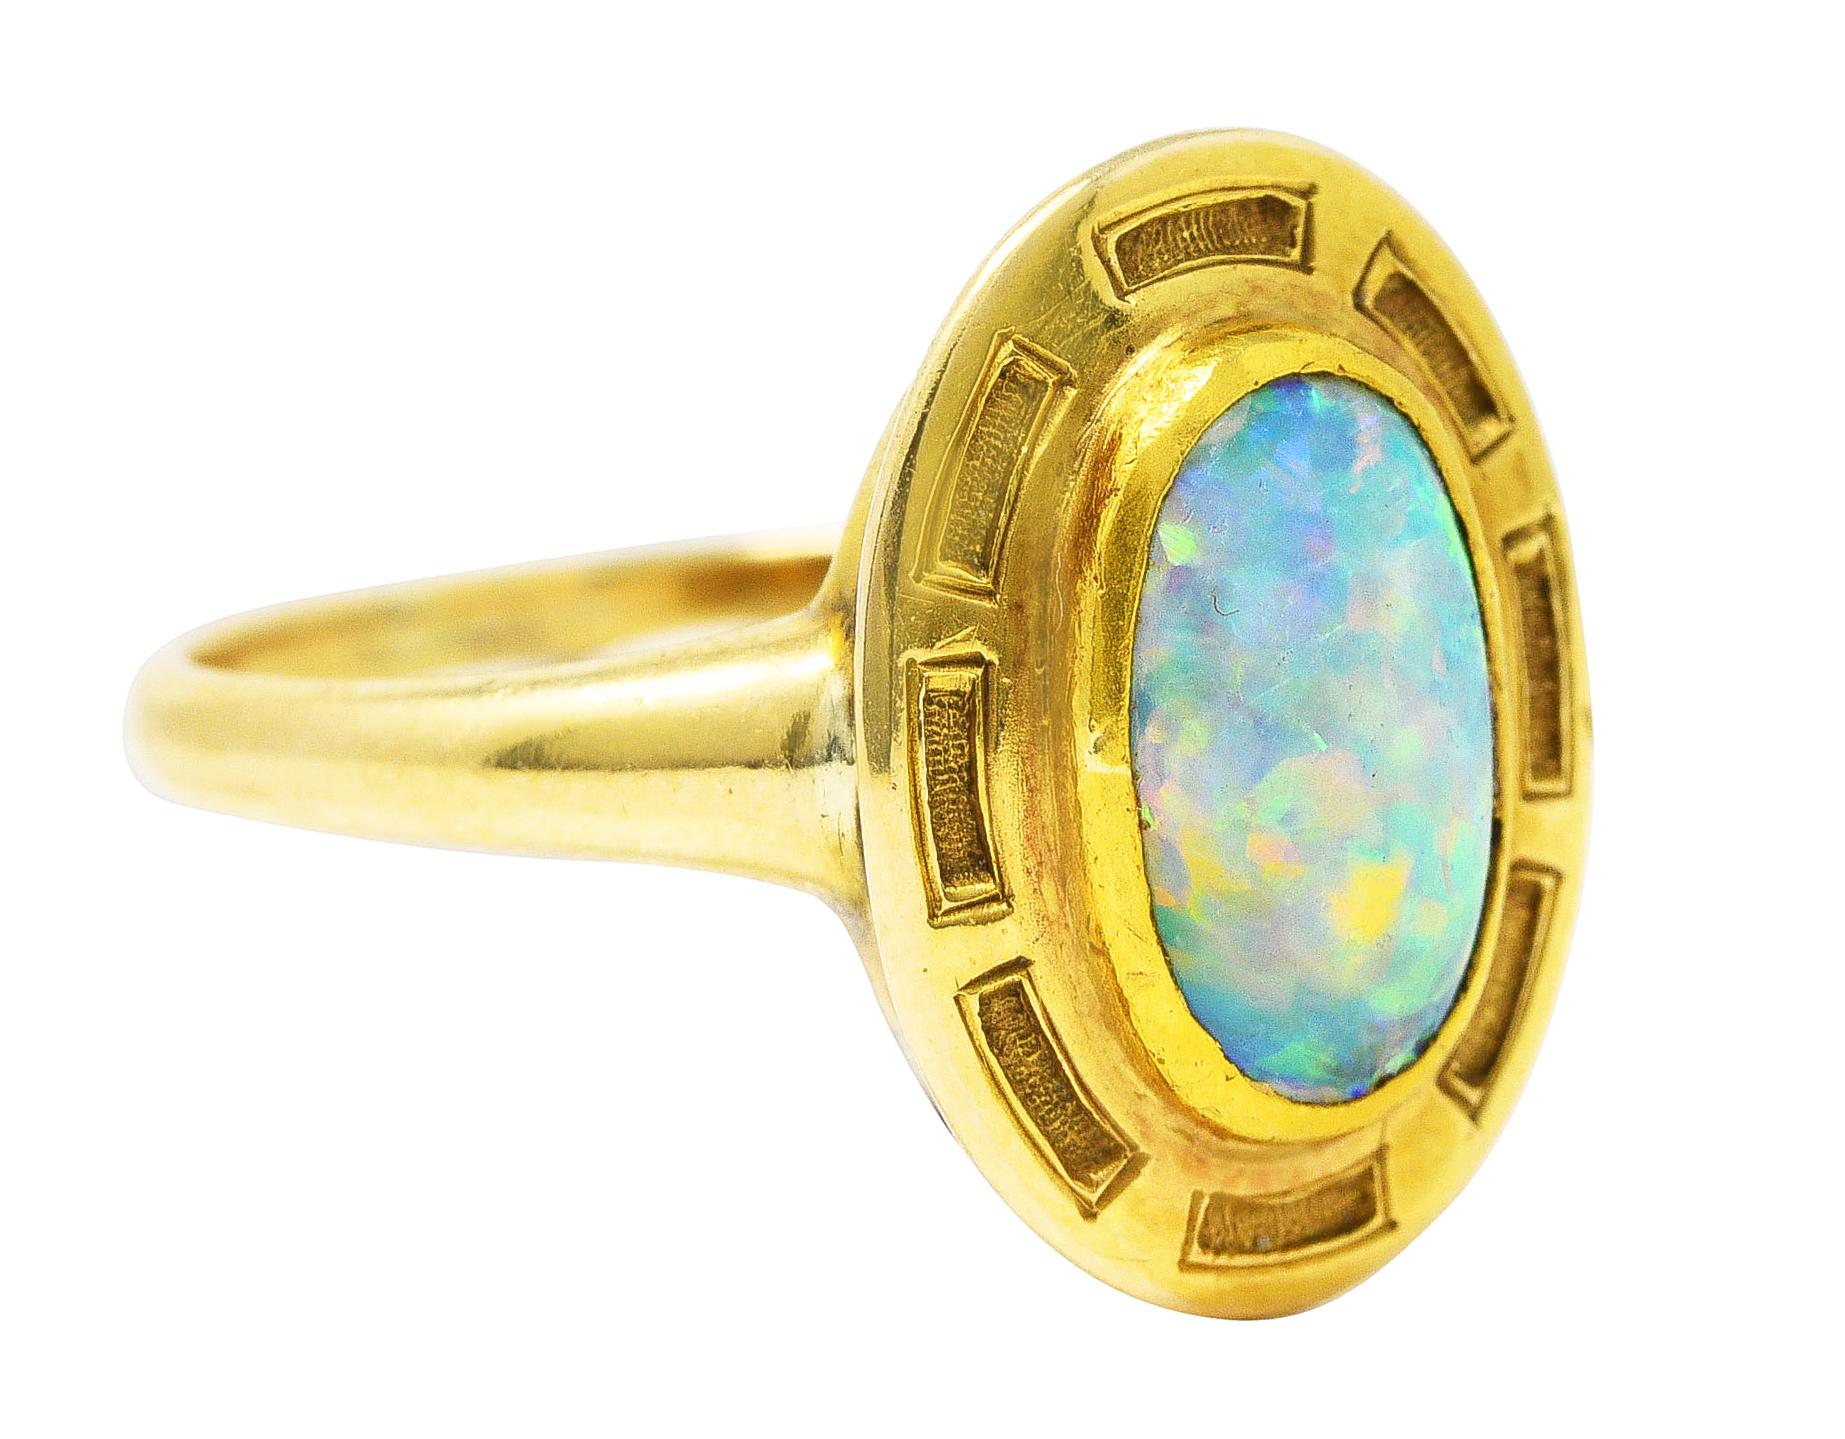 Ring centers a bezel set 6.0 x 9.1 mm oval opal cabochon. White in body color with excellent spectral play-of-color. With gold surround accented by textured rectangular recesses. Tested as 14 karat gold. Circa: 1900's. Ring size: 5 3/4 and sizable.